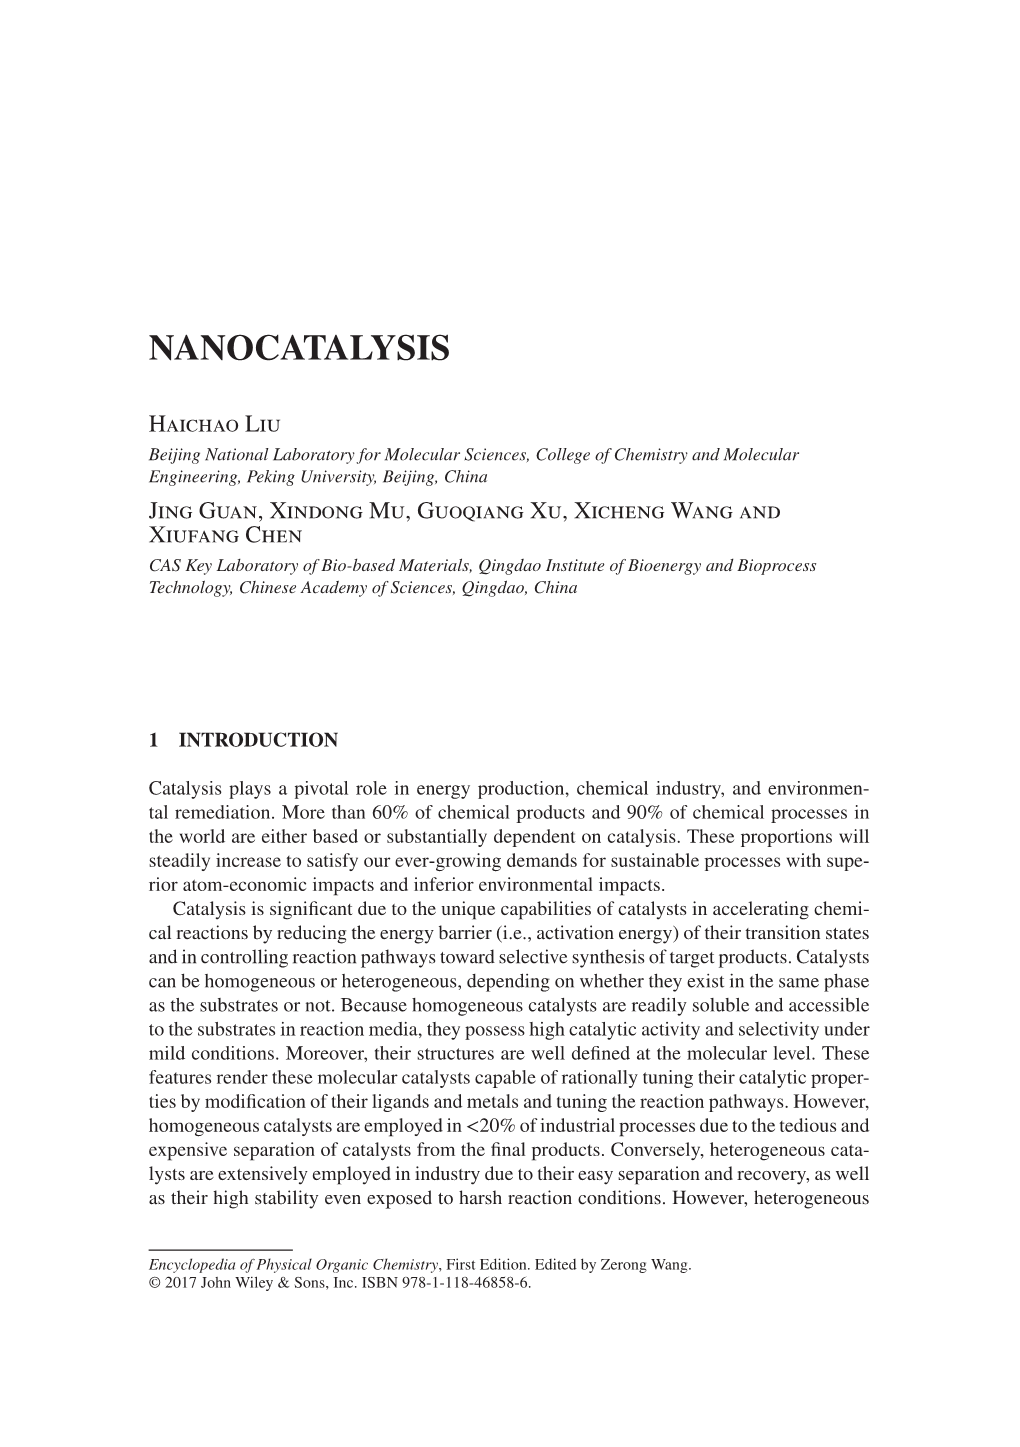 "Nanocatalysis" In: Encyclopedia of Physical Organic Chemistry Online